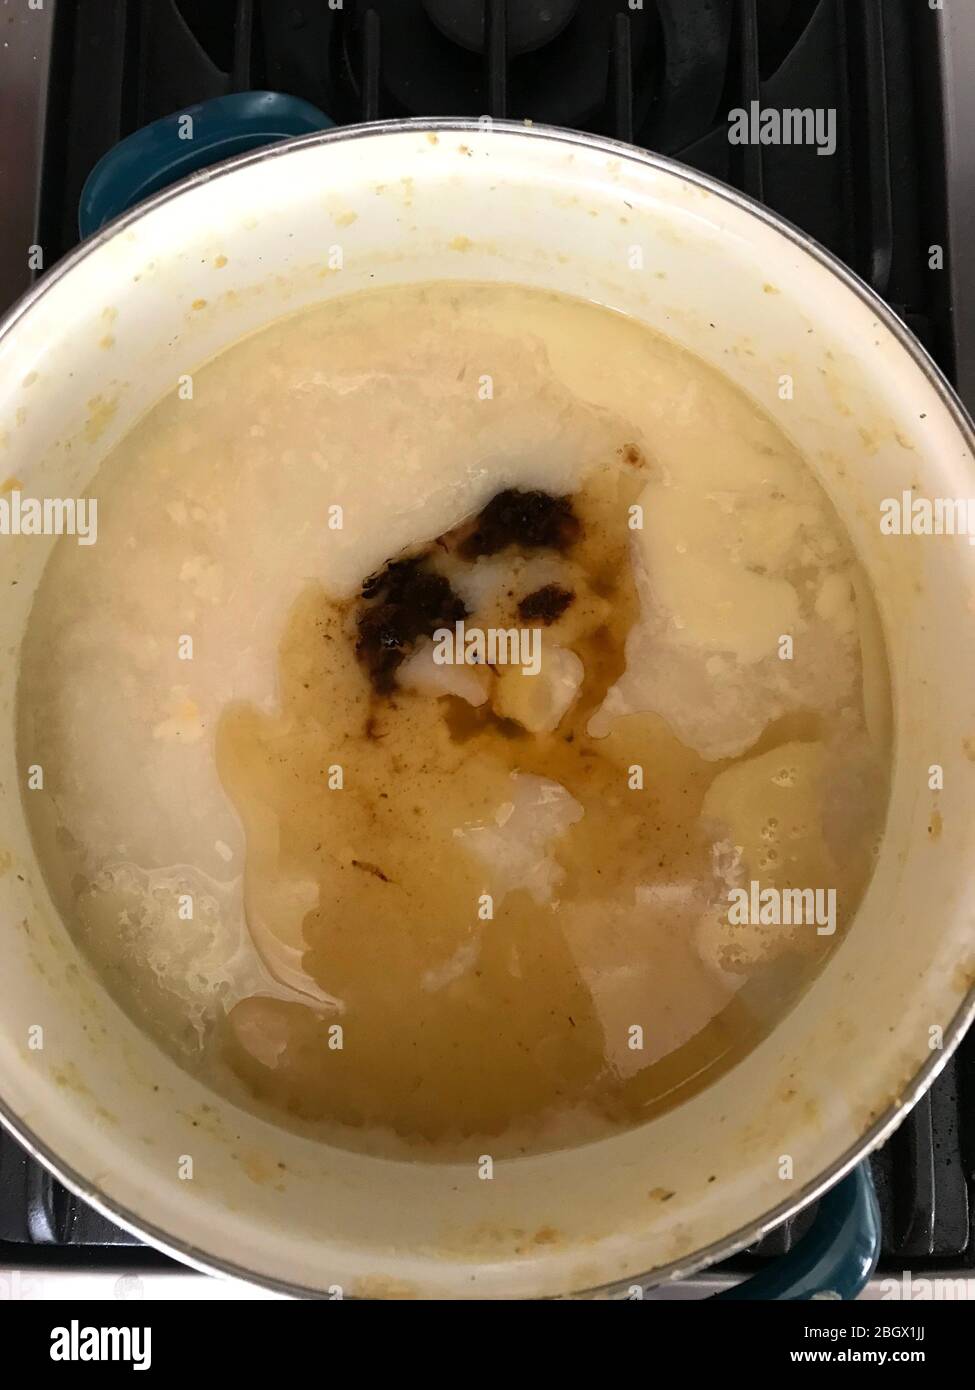 The face of a cat seems to appear in a pot of soup boiling on the stove. Stock Photo